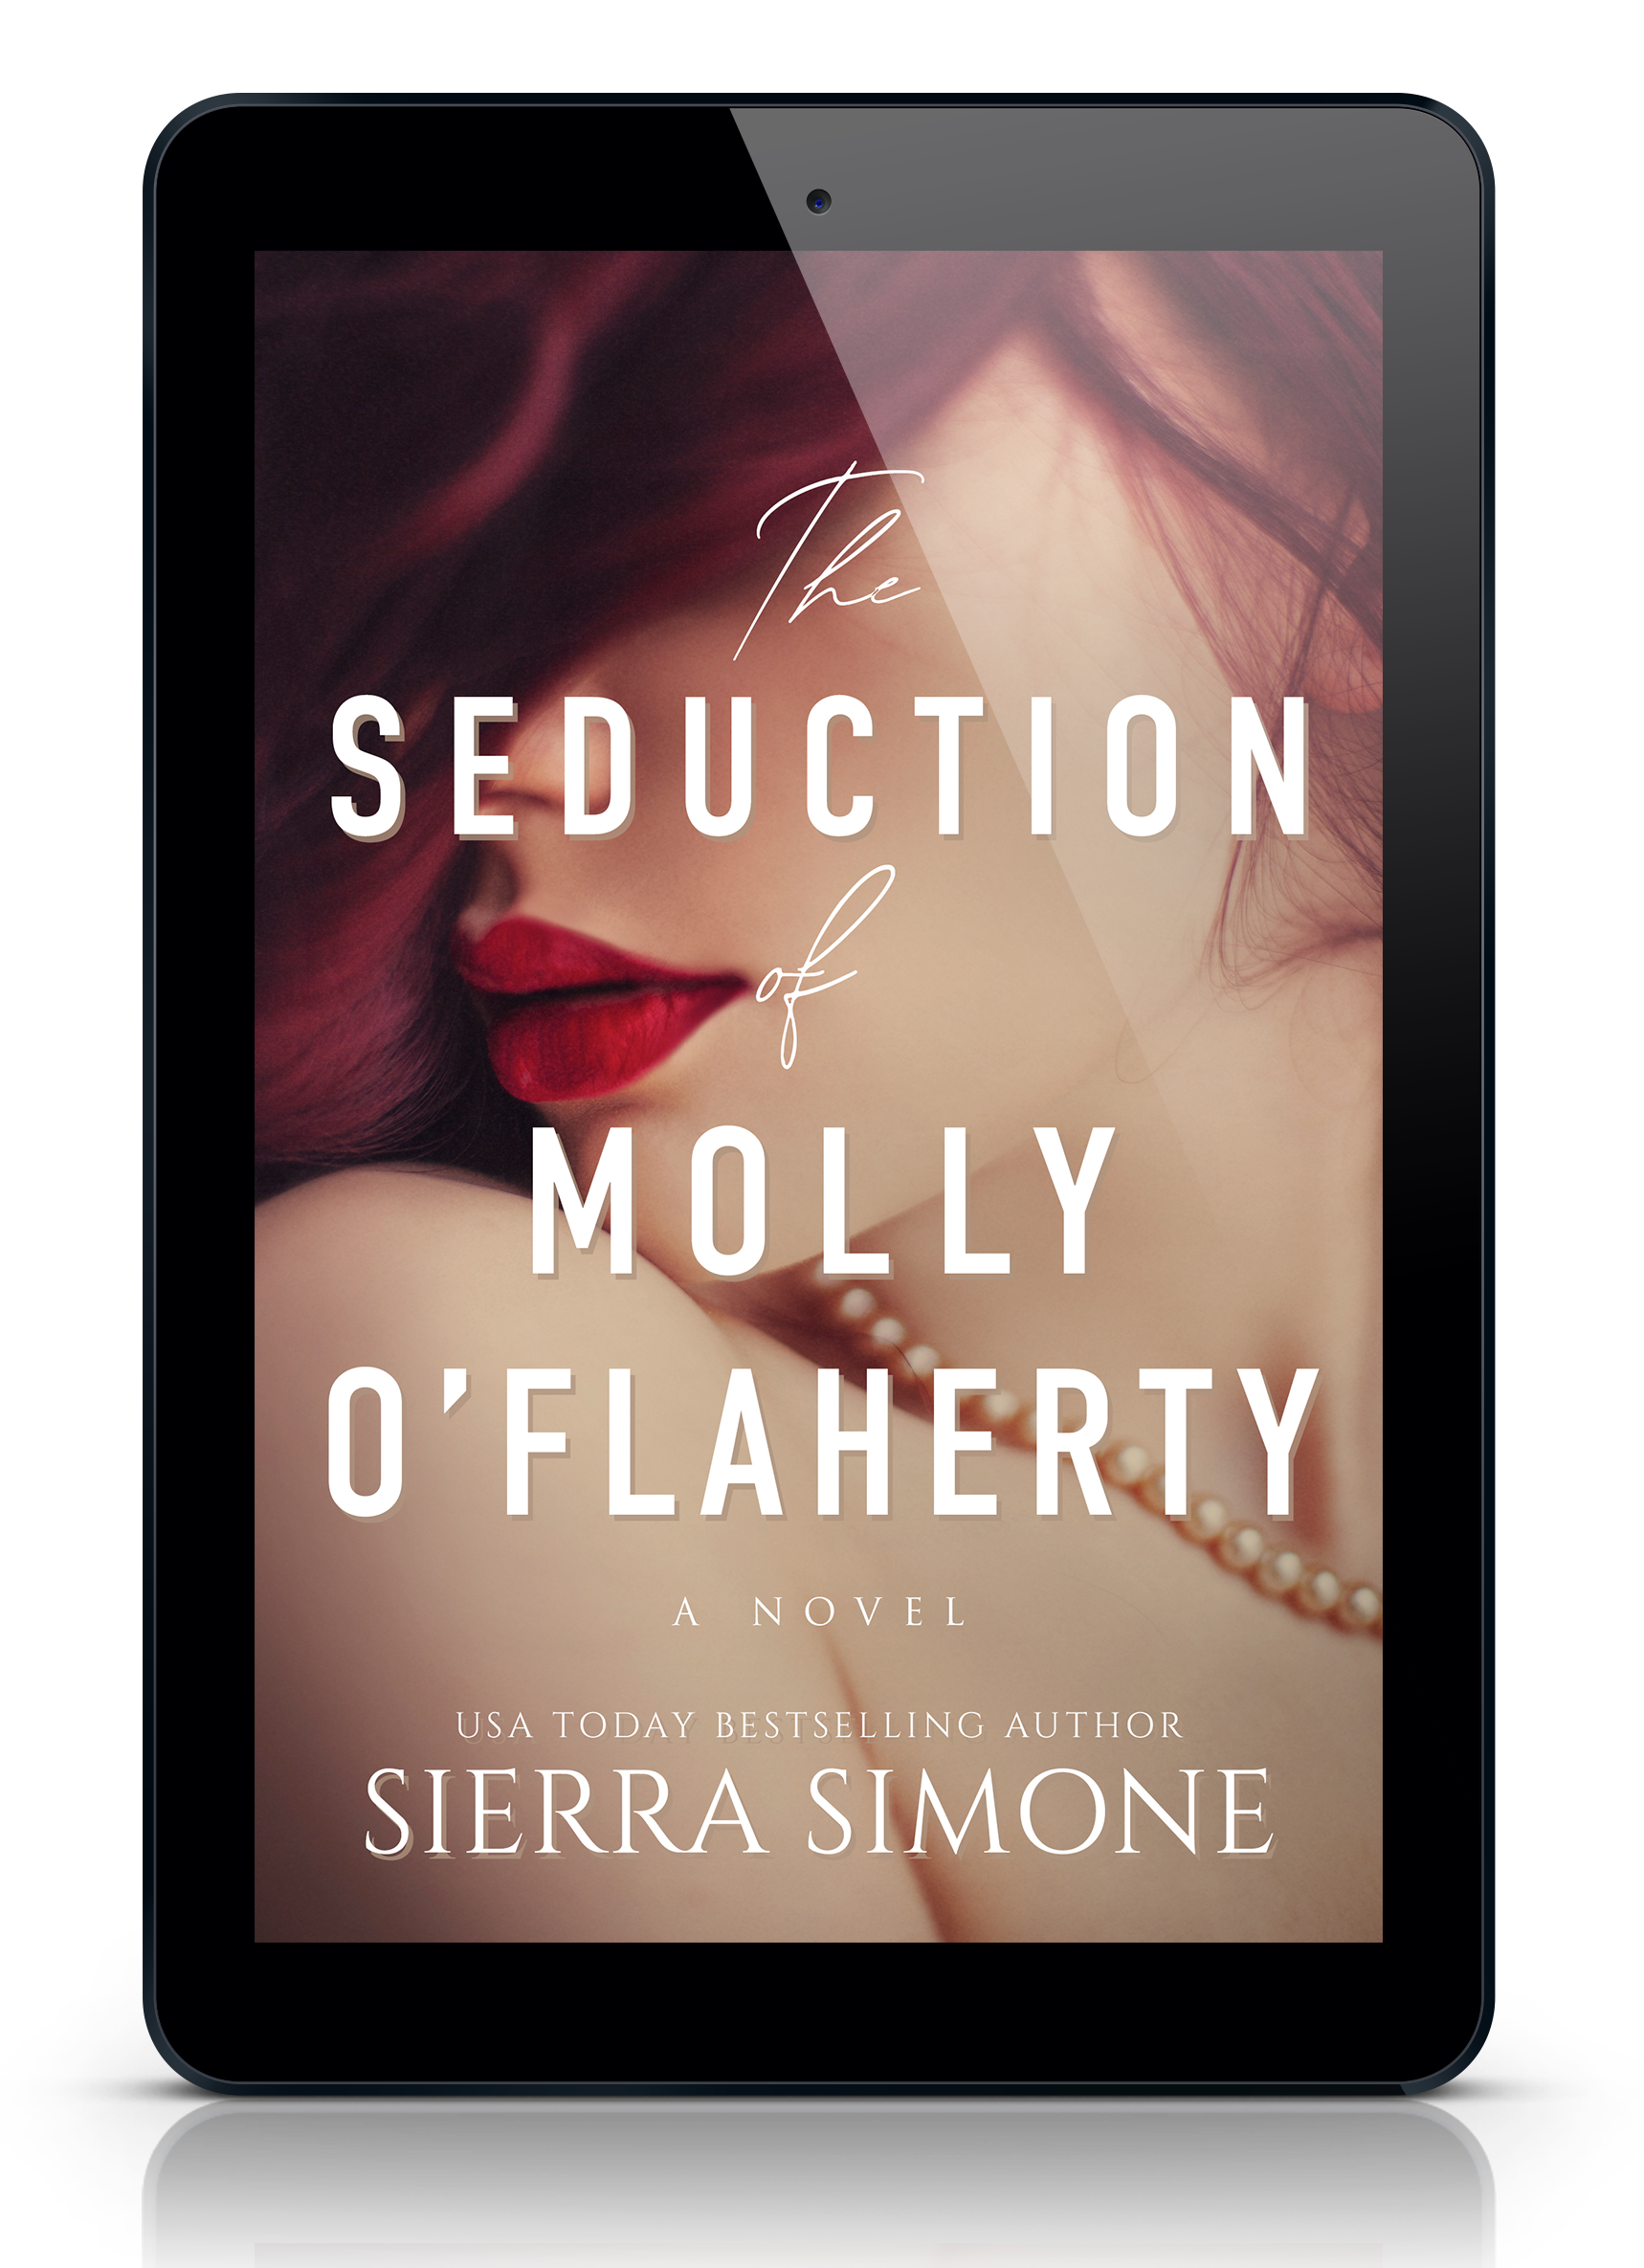 The Seduction of Molly O'Flaherty